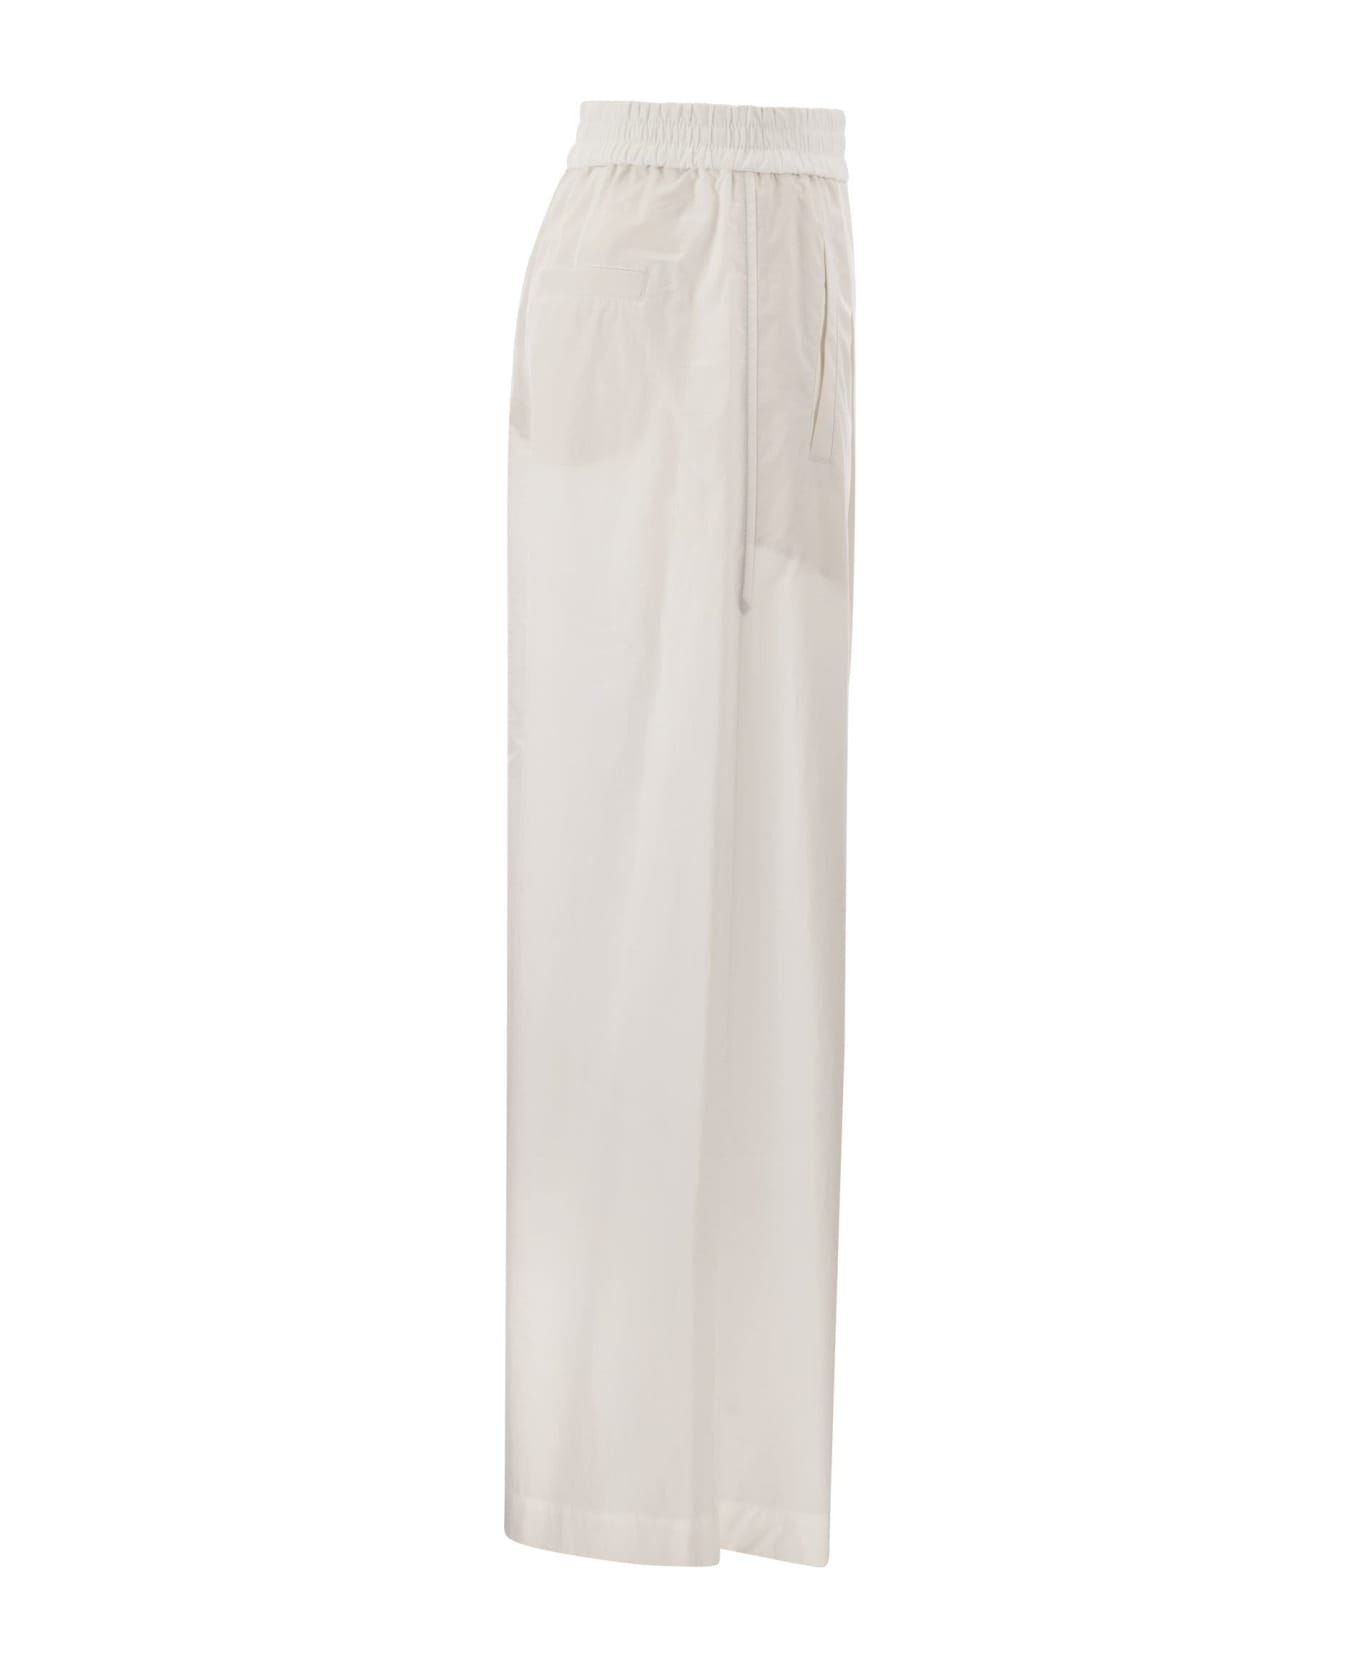 Brunello Cucinelli Relaxed Light Cotton Trousers - White